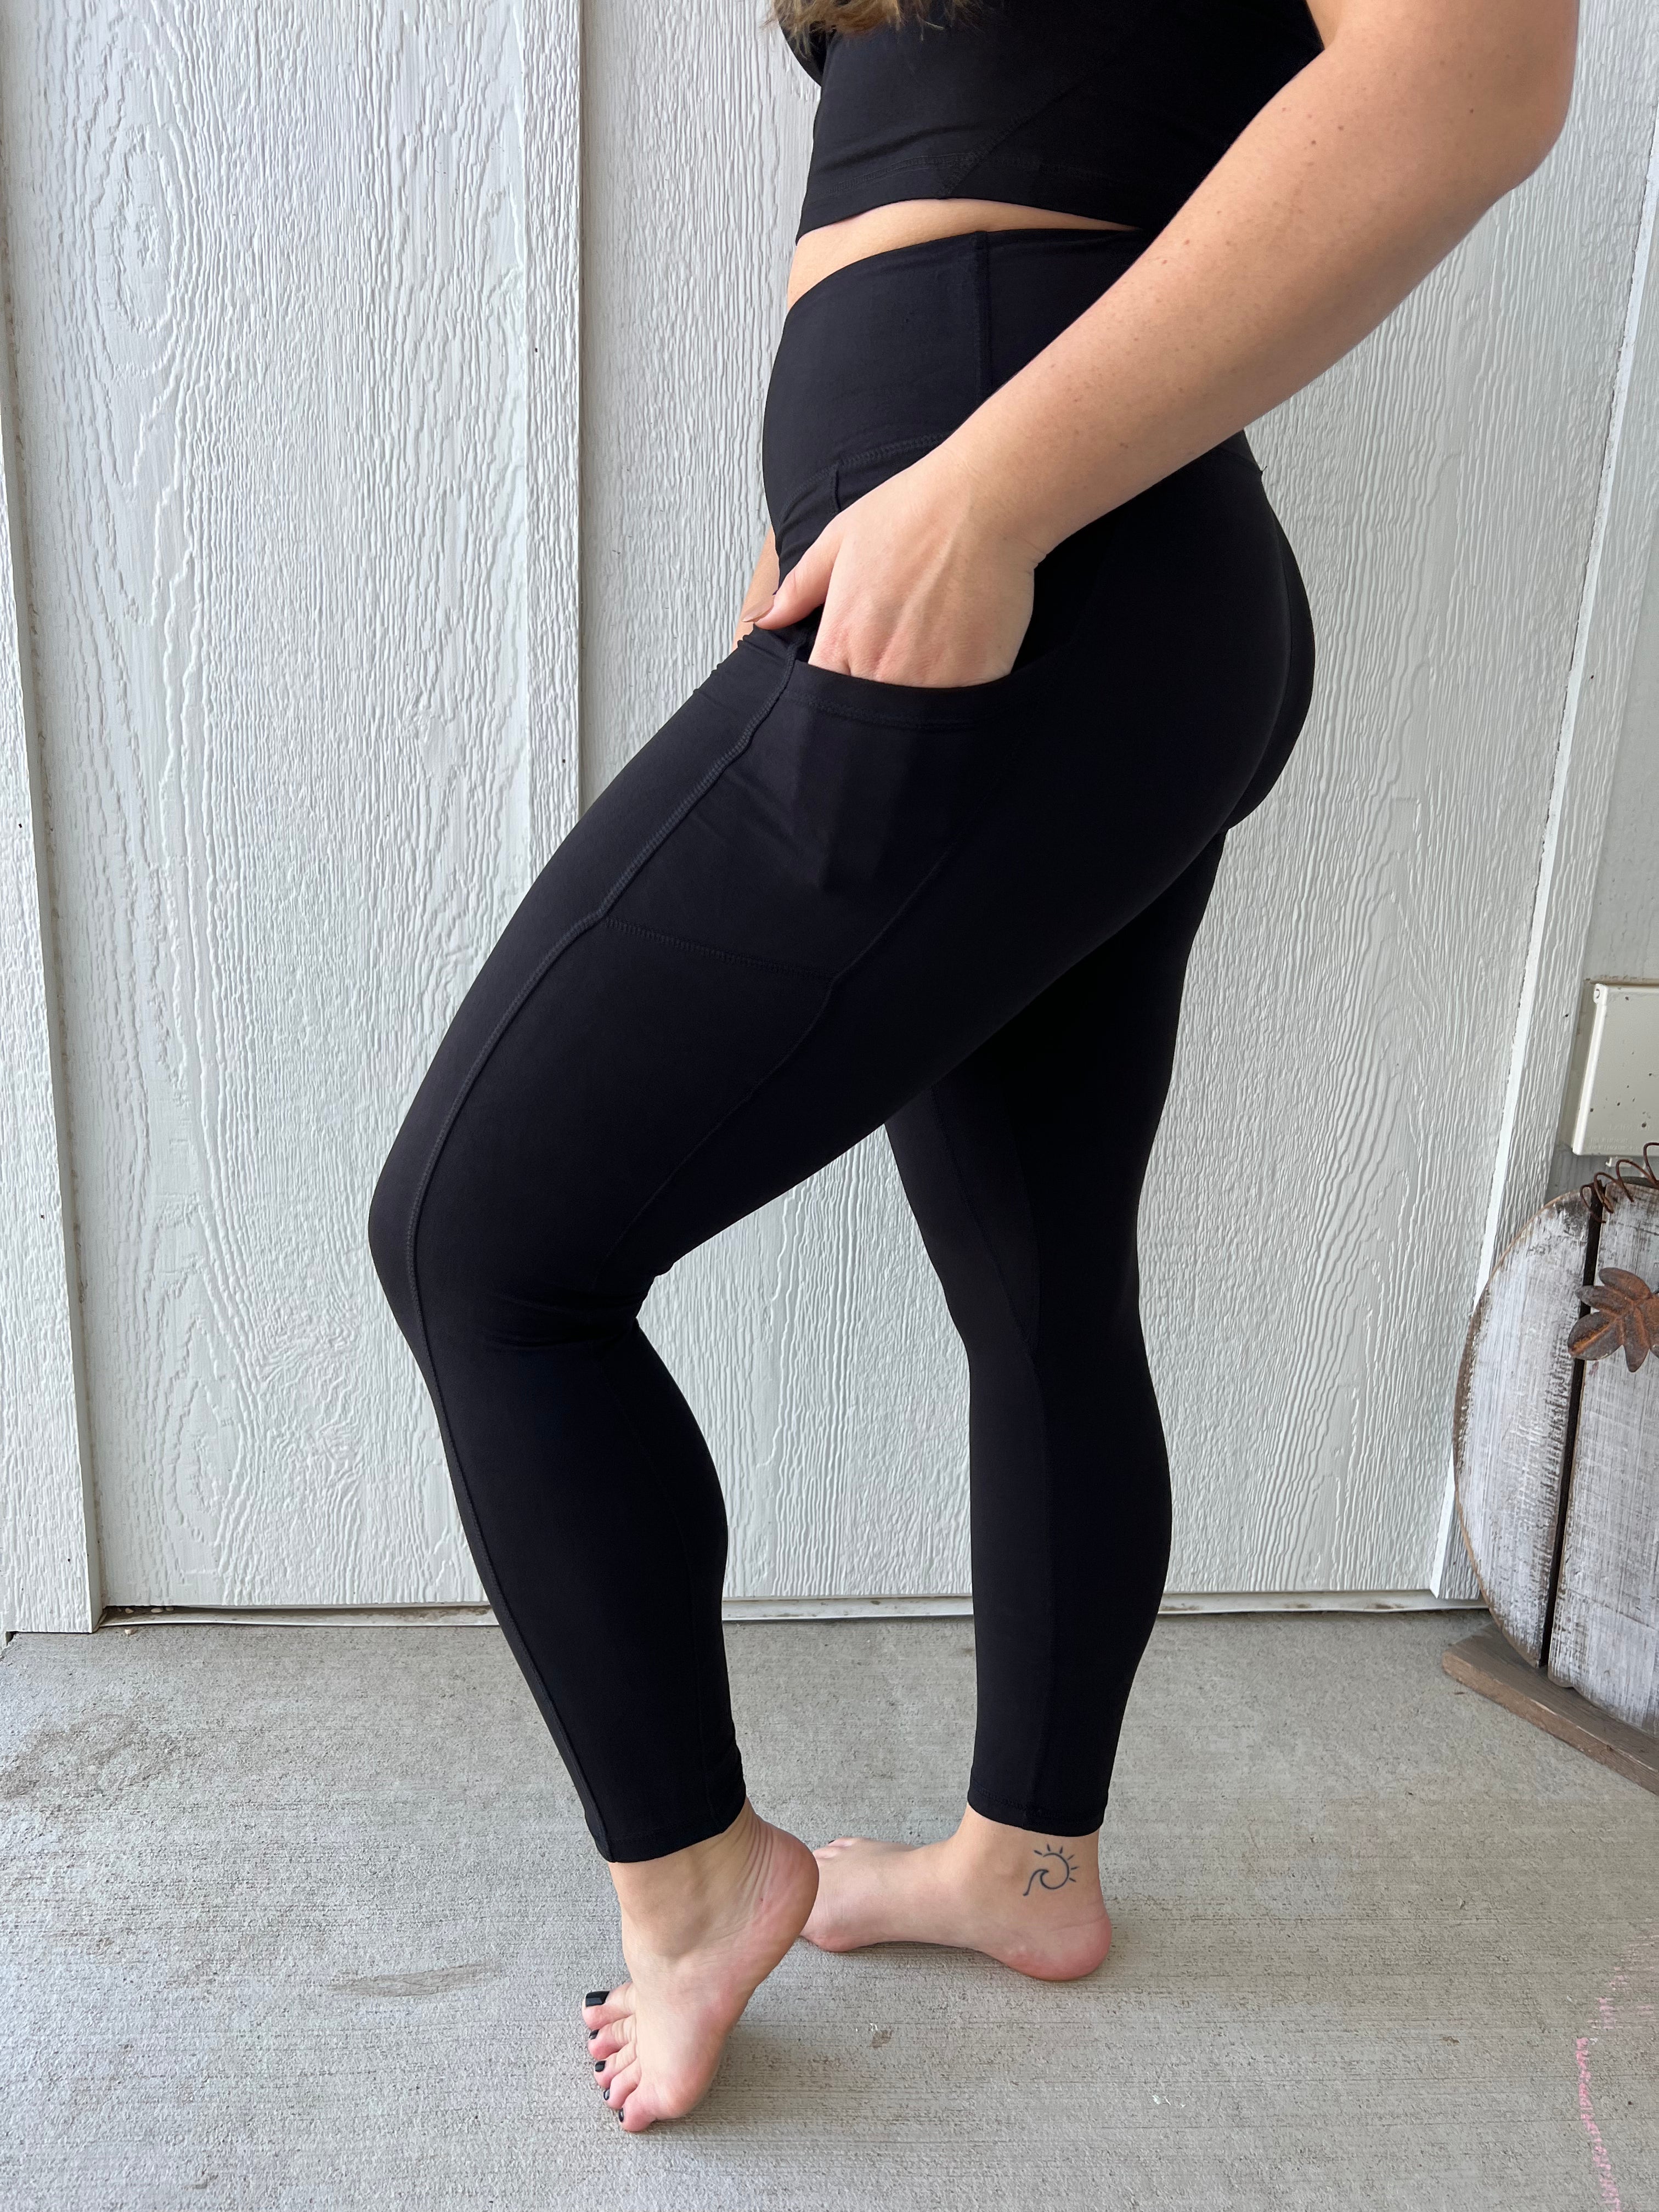 The BUTTERY SOFT Hannah Leggings - Black + Tidewater Teal